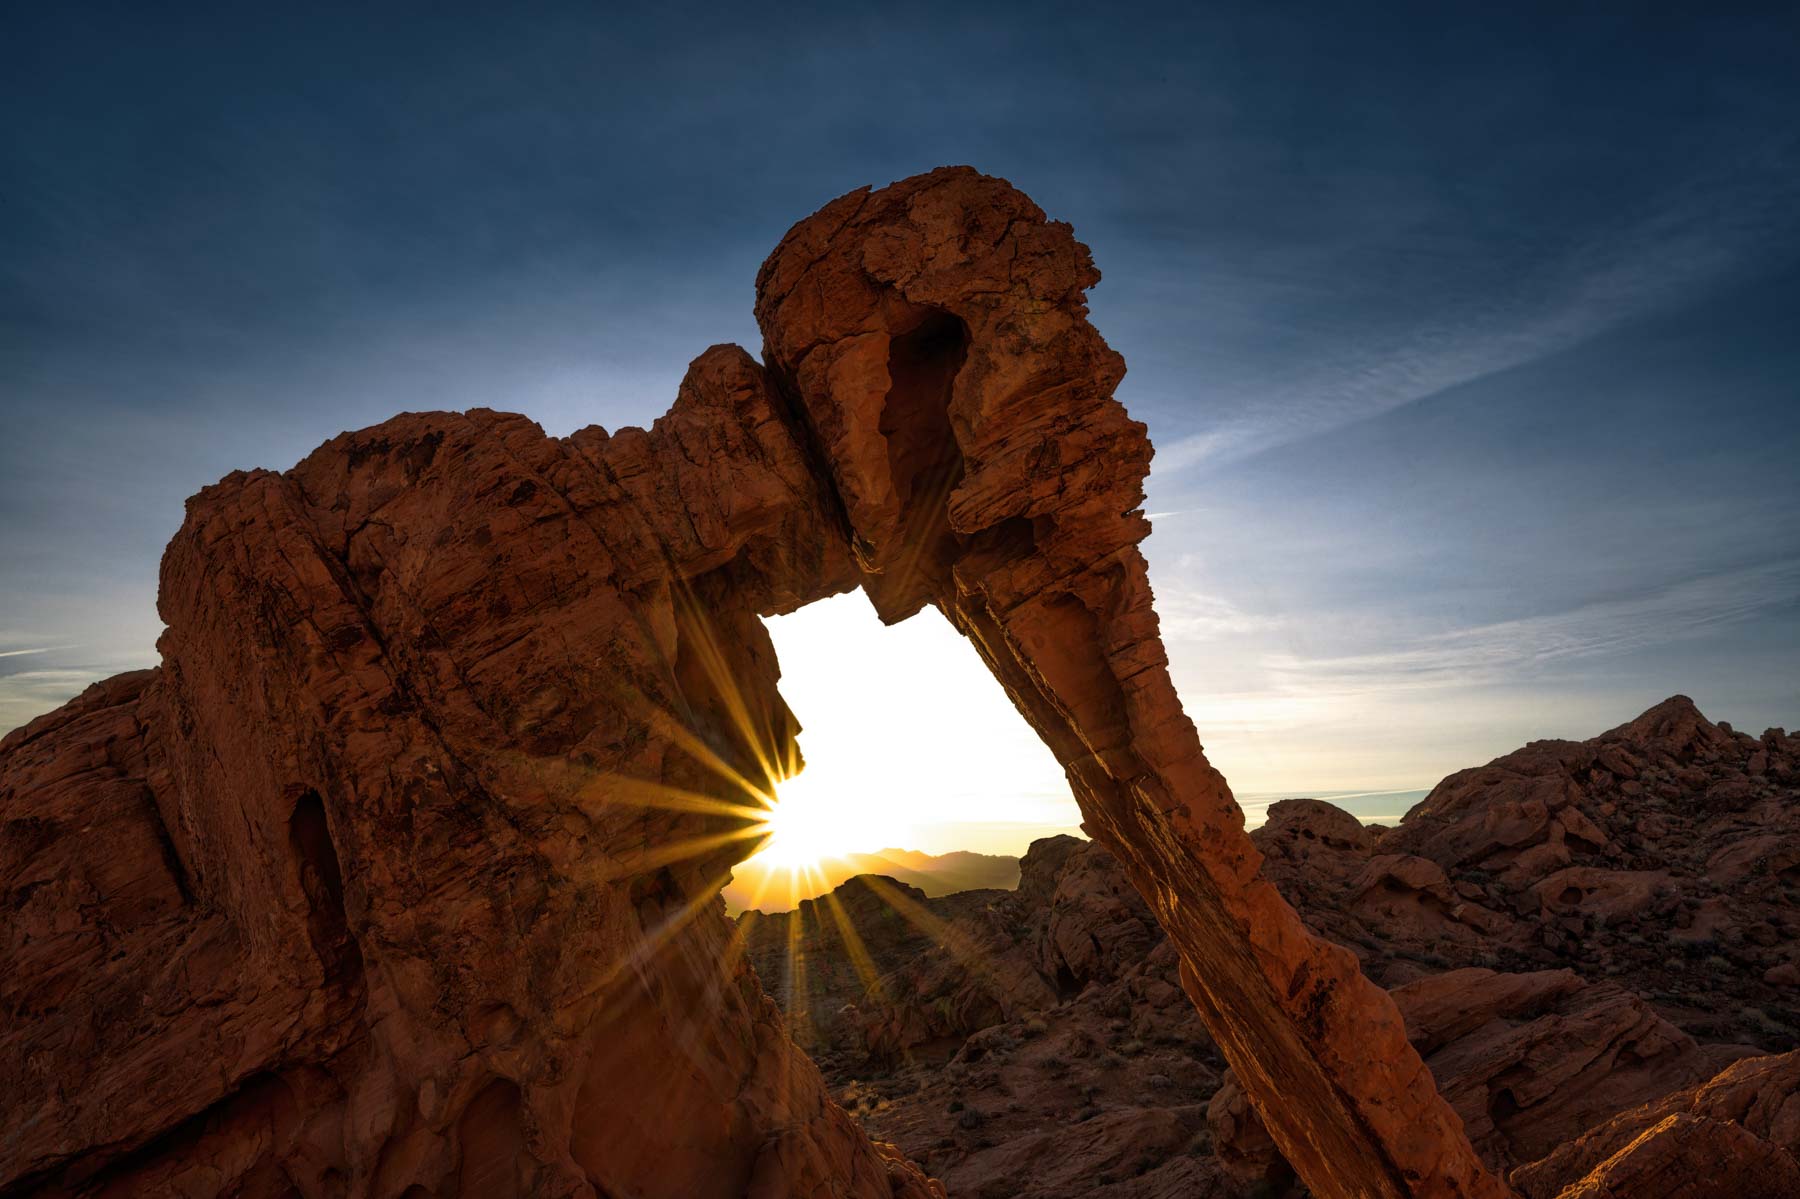 Elephant Rock in Valley of Fire State Park, Nevada